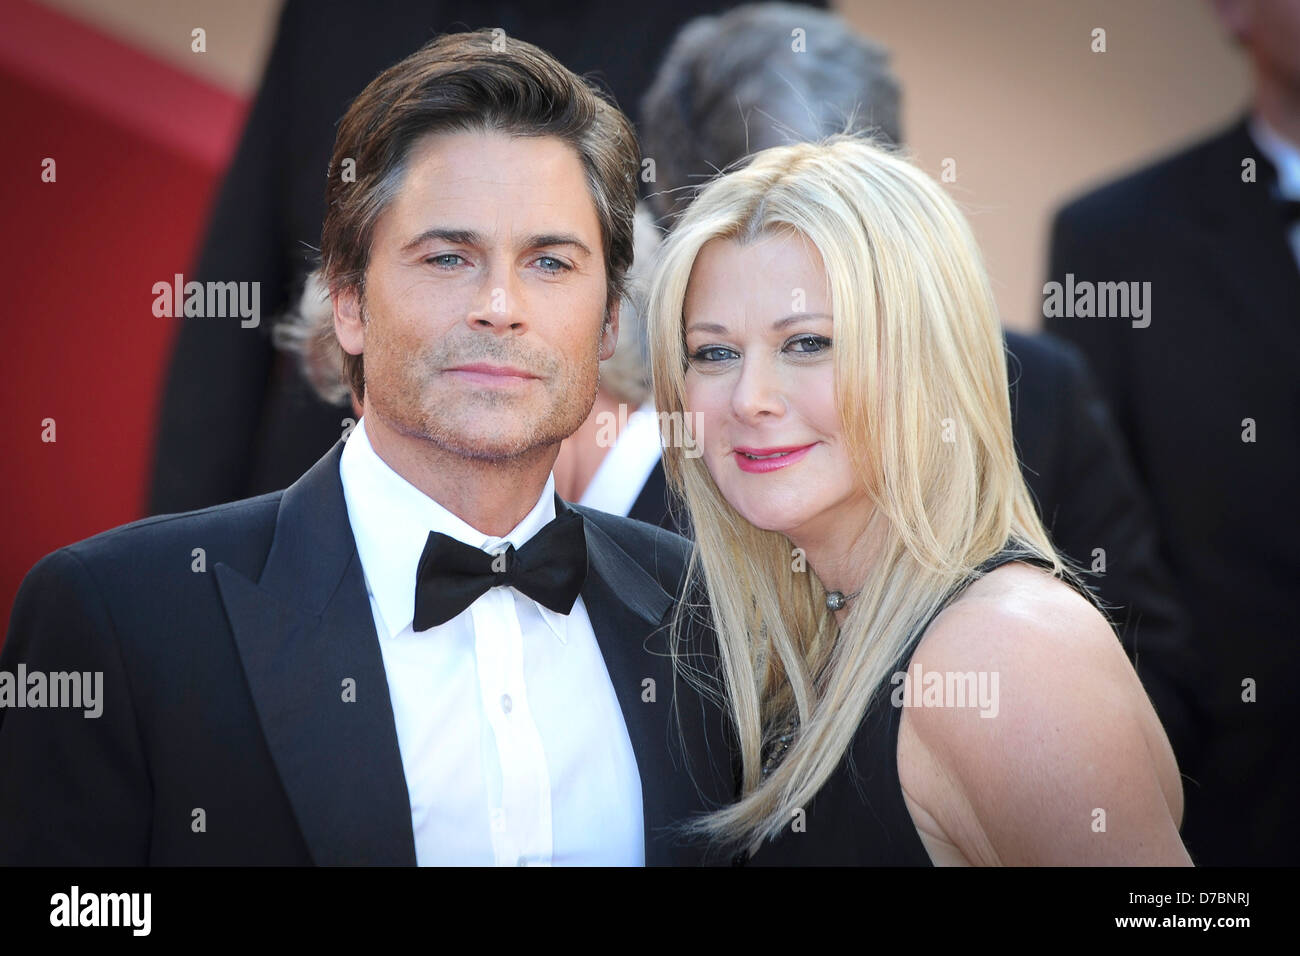 Rob Lowe, Sheryl Berkoff 2011 Cannes International Film Festival - Day 6 - The Tree of Life - Premiere Cannes, France - Stock Photo